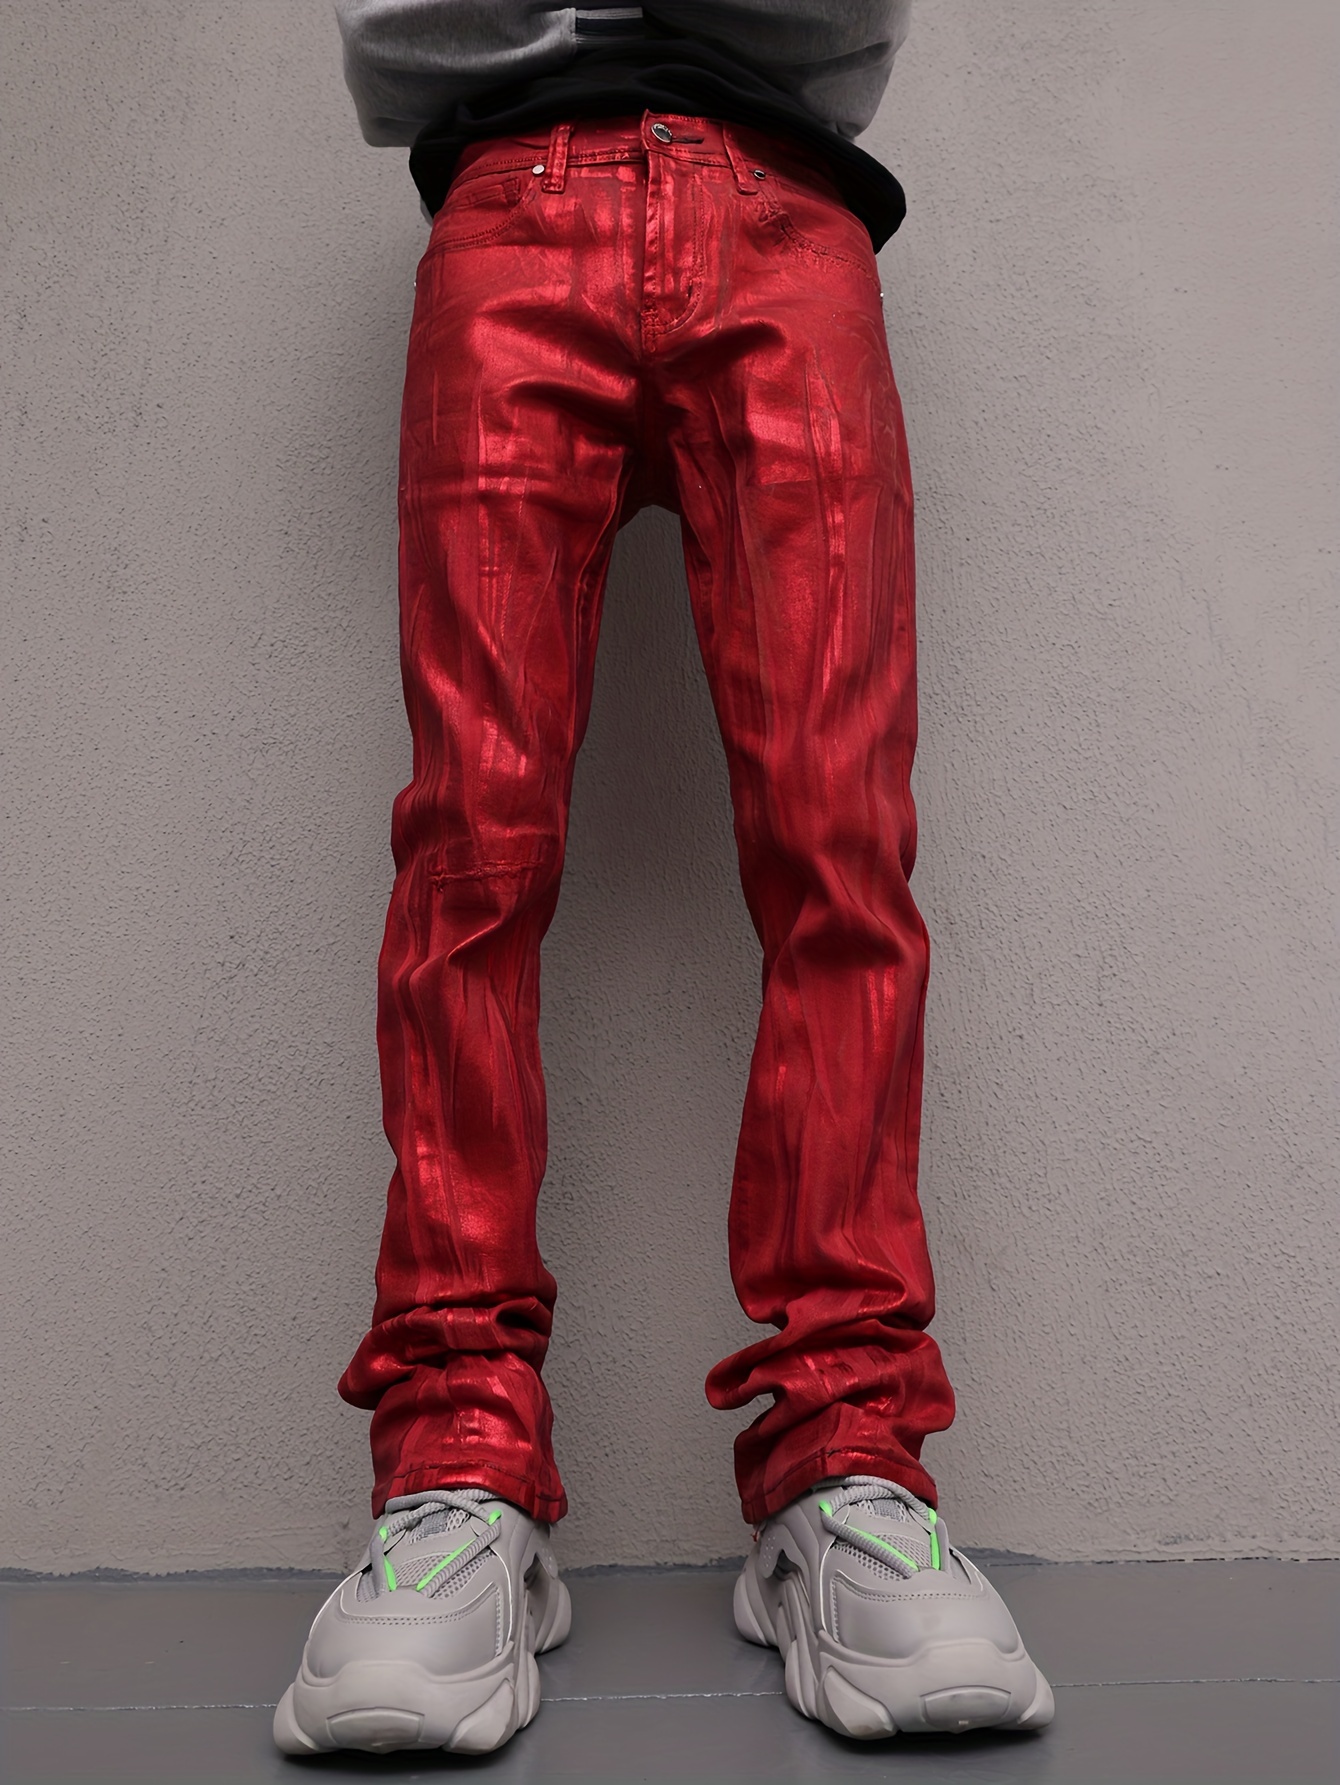 Mens Red Leather Pants